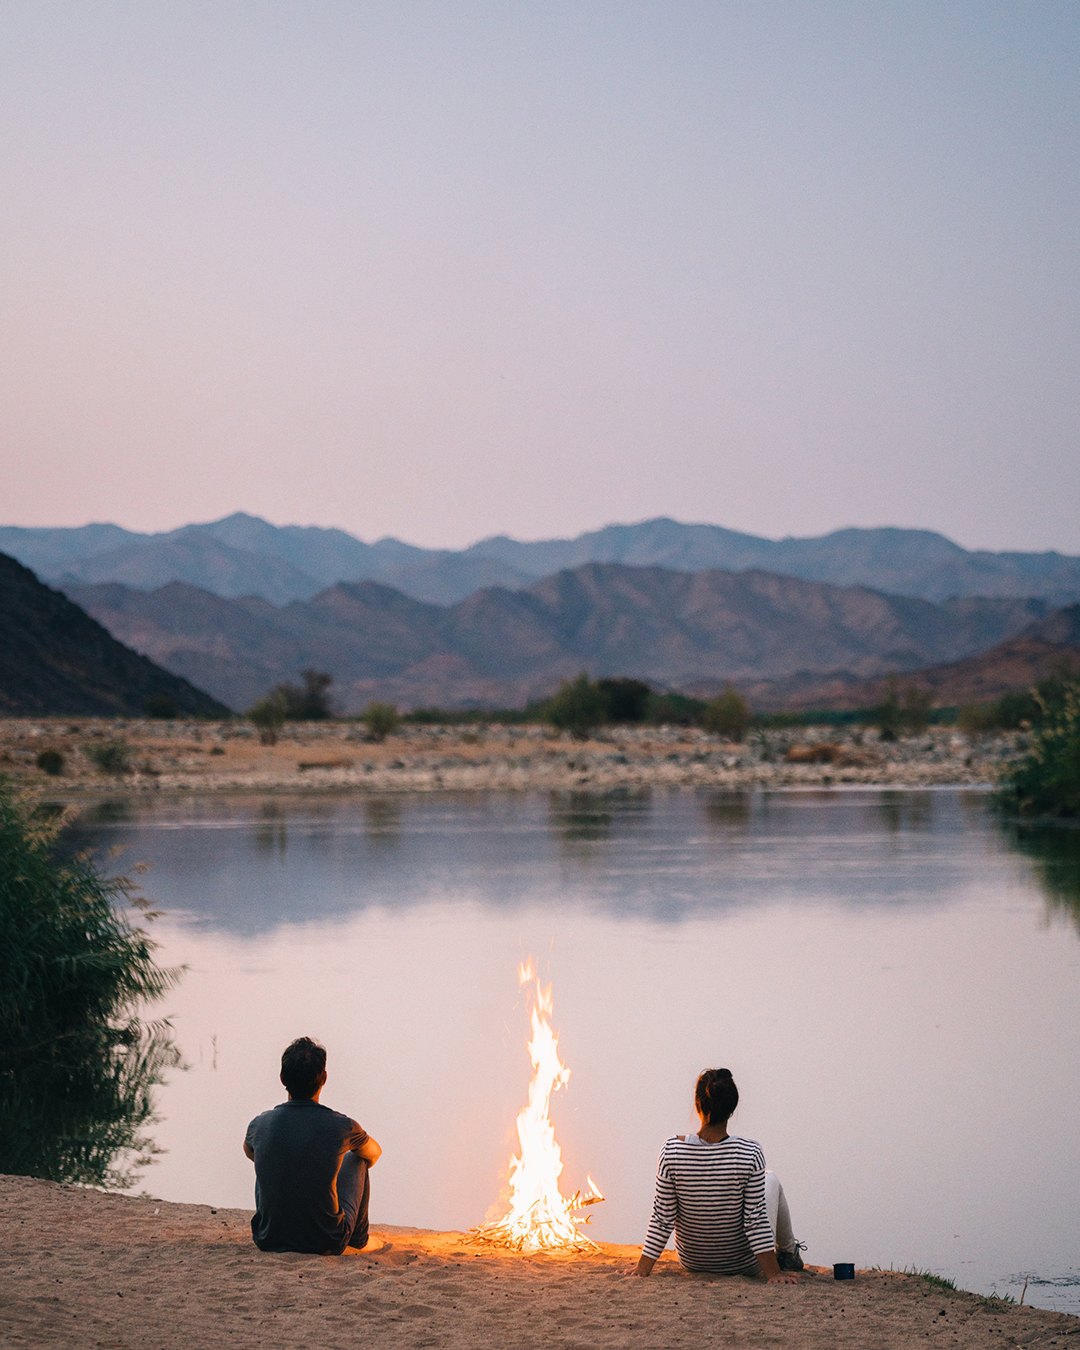 two people sitting on edge of river bank with small fire, looking out onto river at sunset